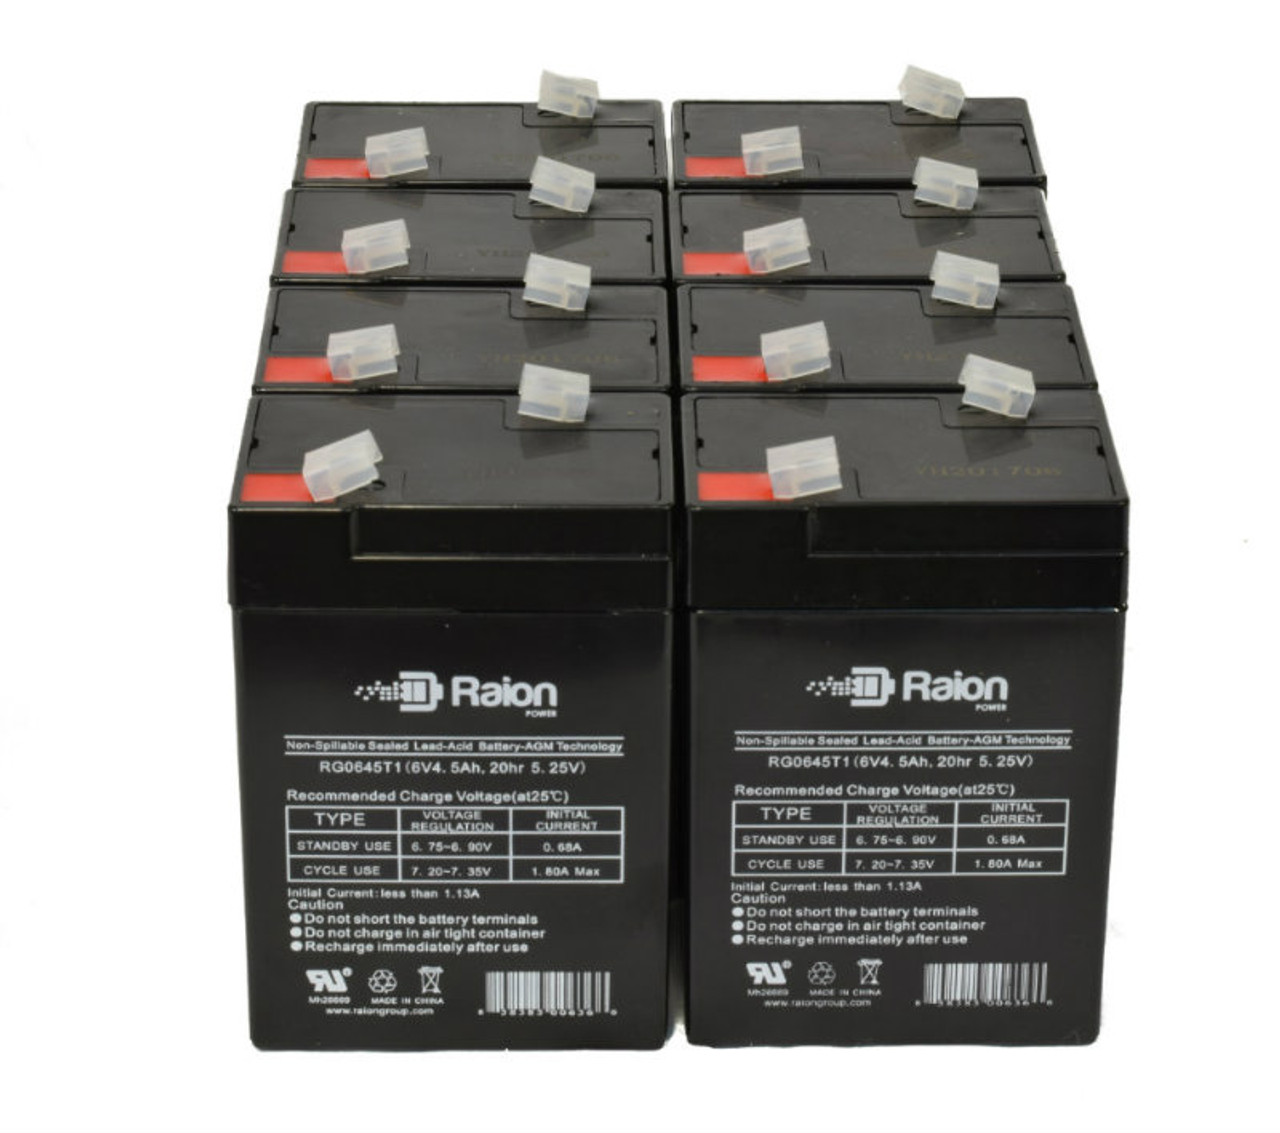 Raion Power 6 Volt 4.5Ah RG0645T1 Replacement Battery for BSB GB6-4.5 - 8 Pack